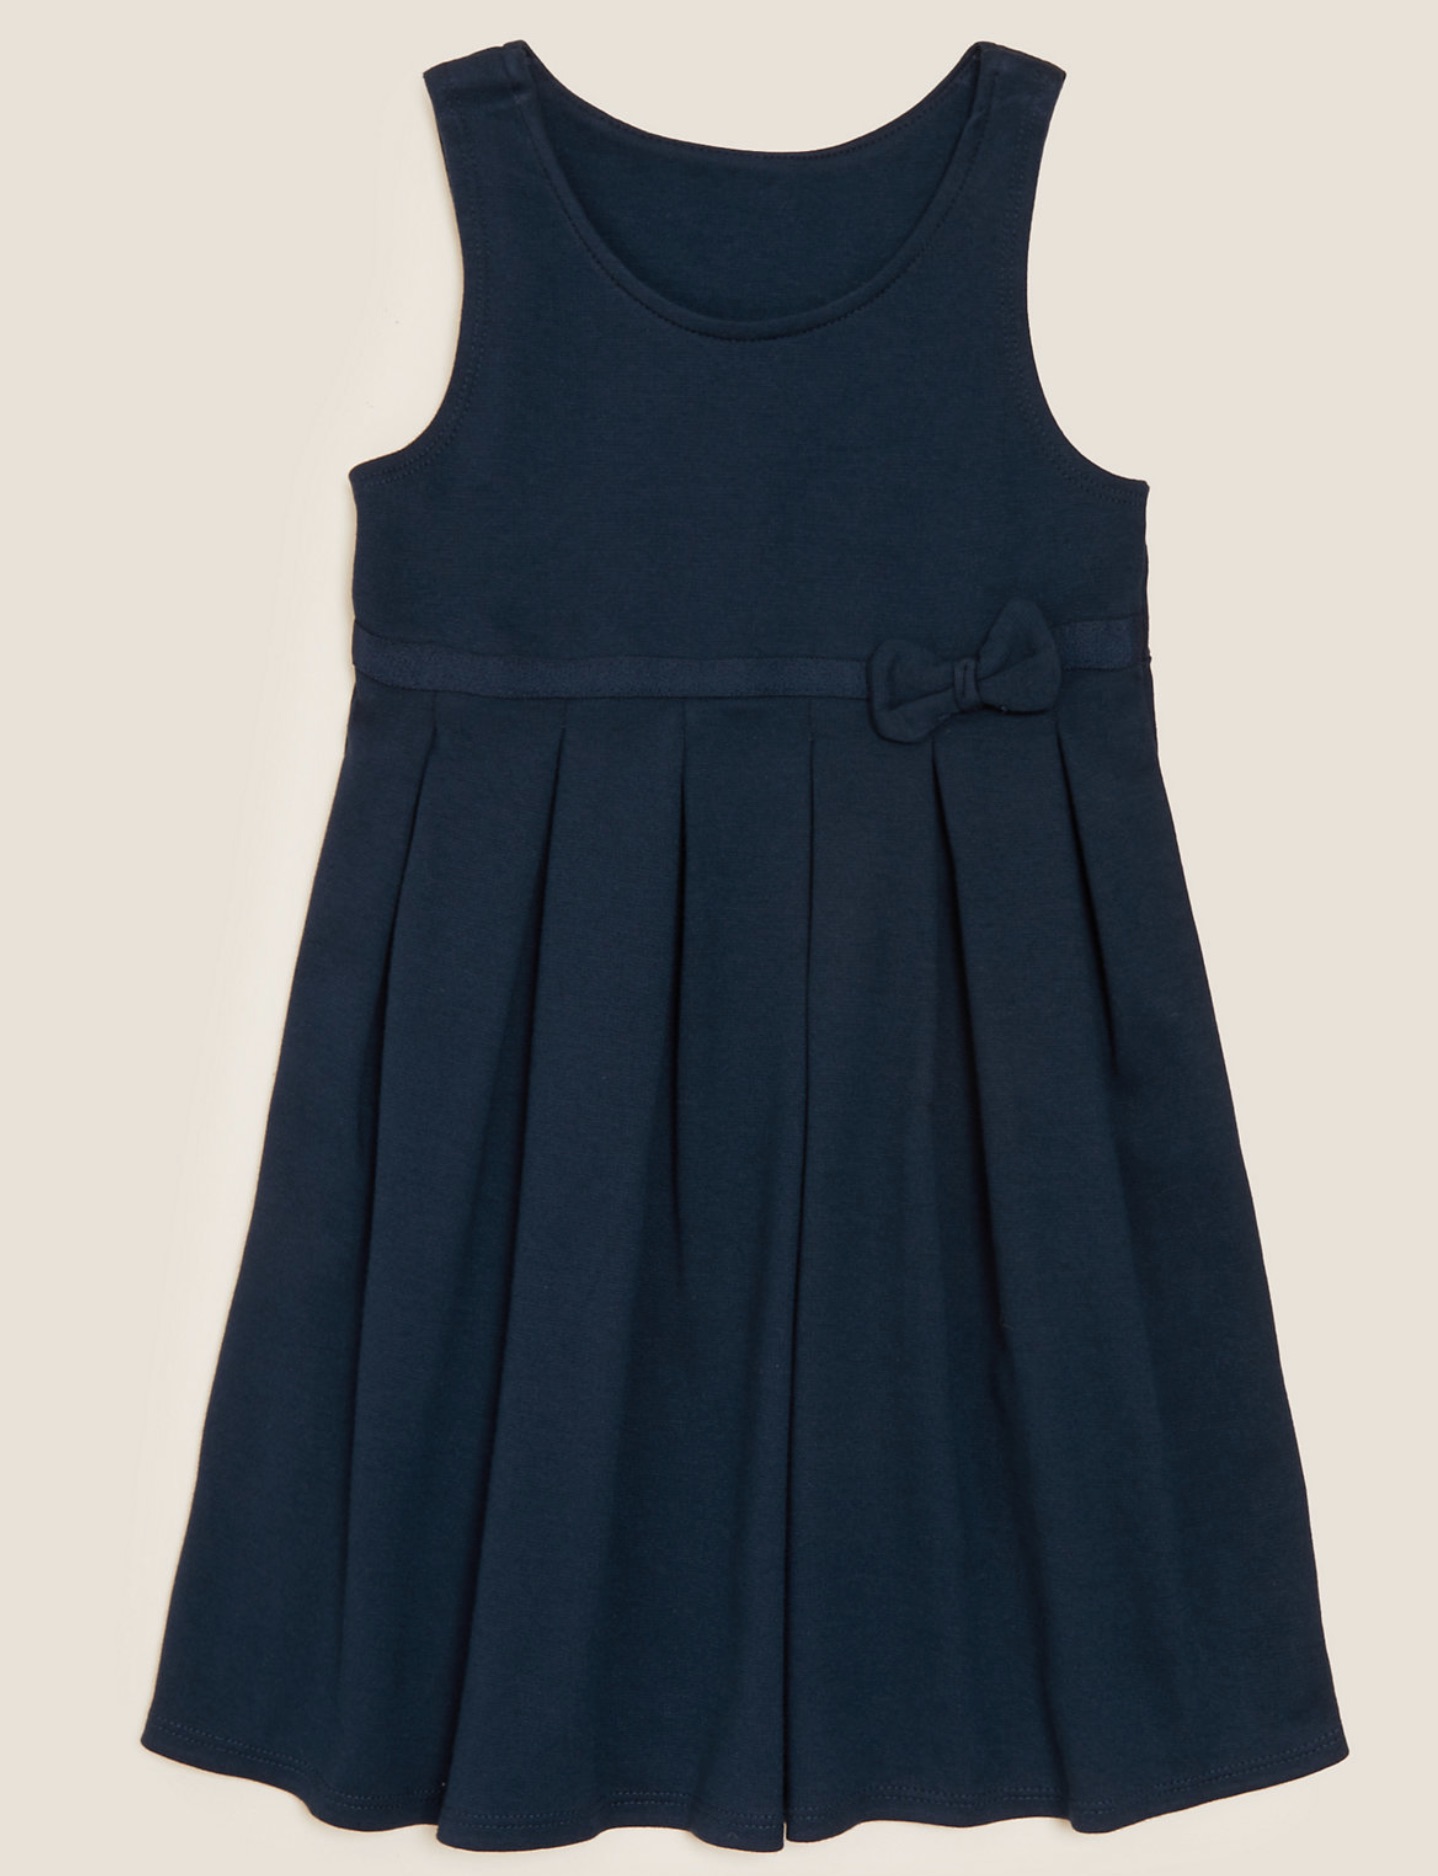 Girls' Navy Jersey Pinafore Dress, Pleated/Gathered Waist 9-10 Y